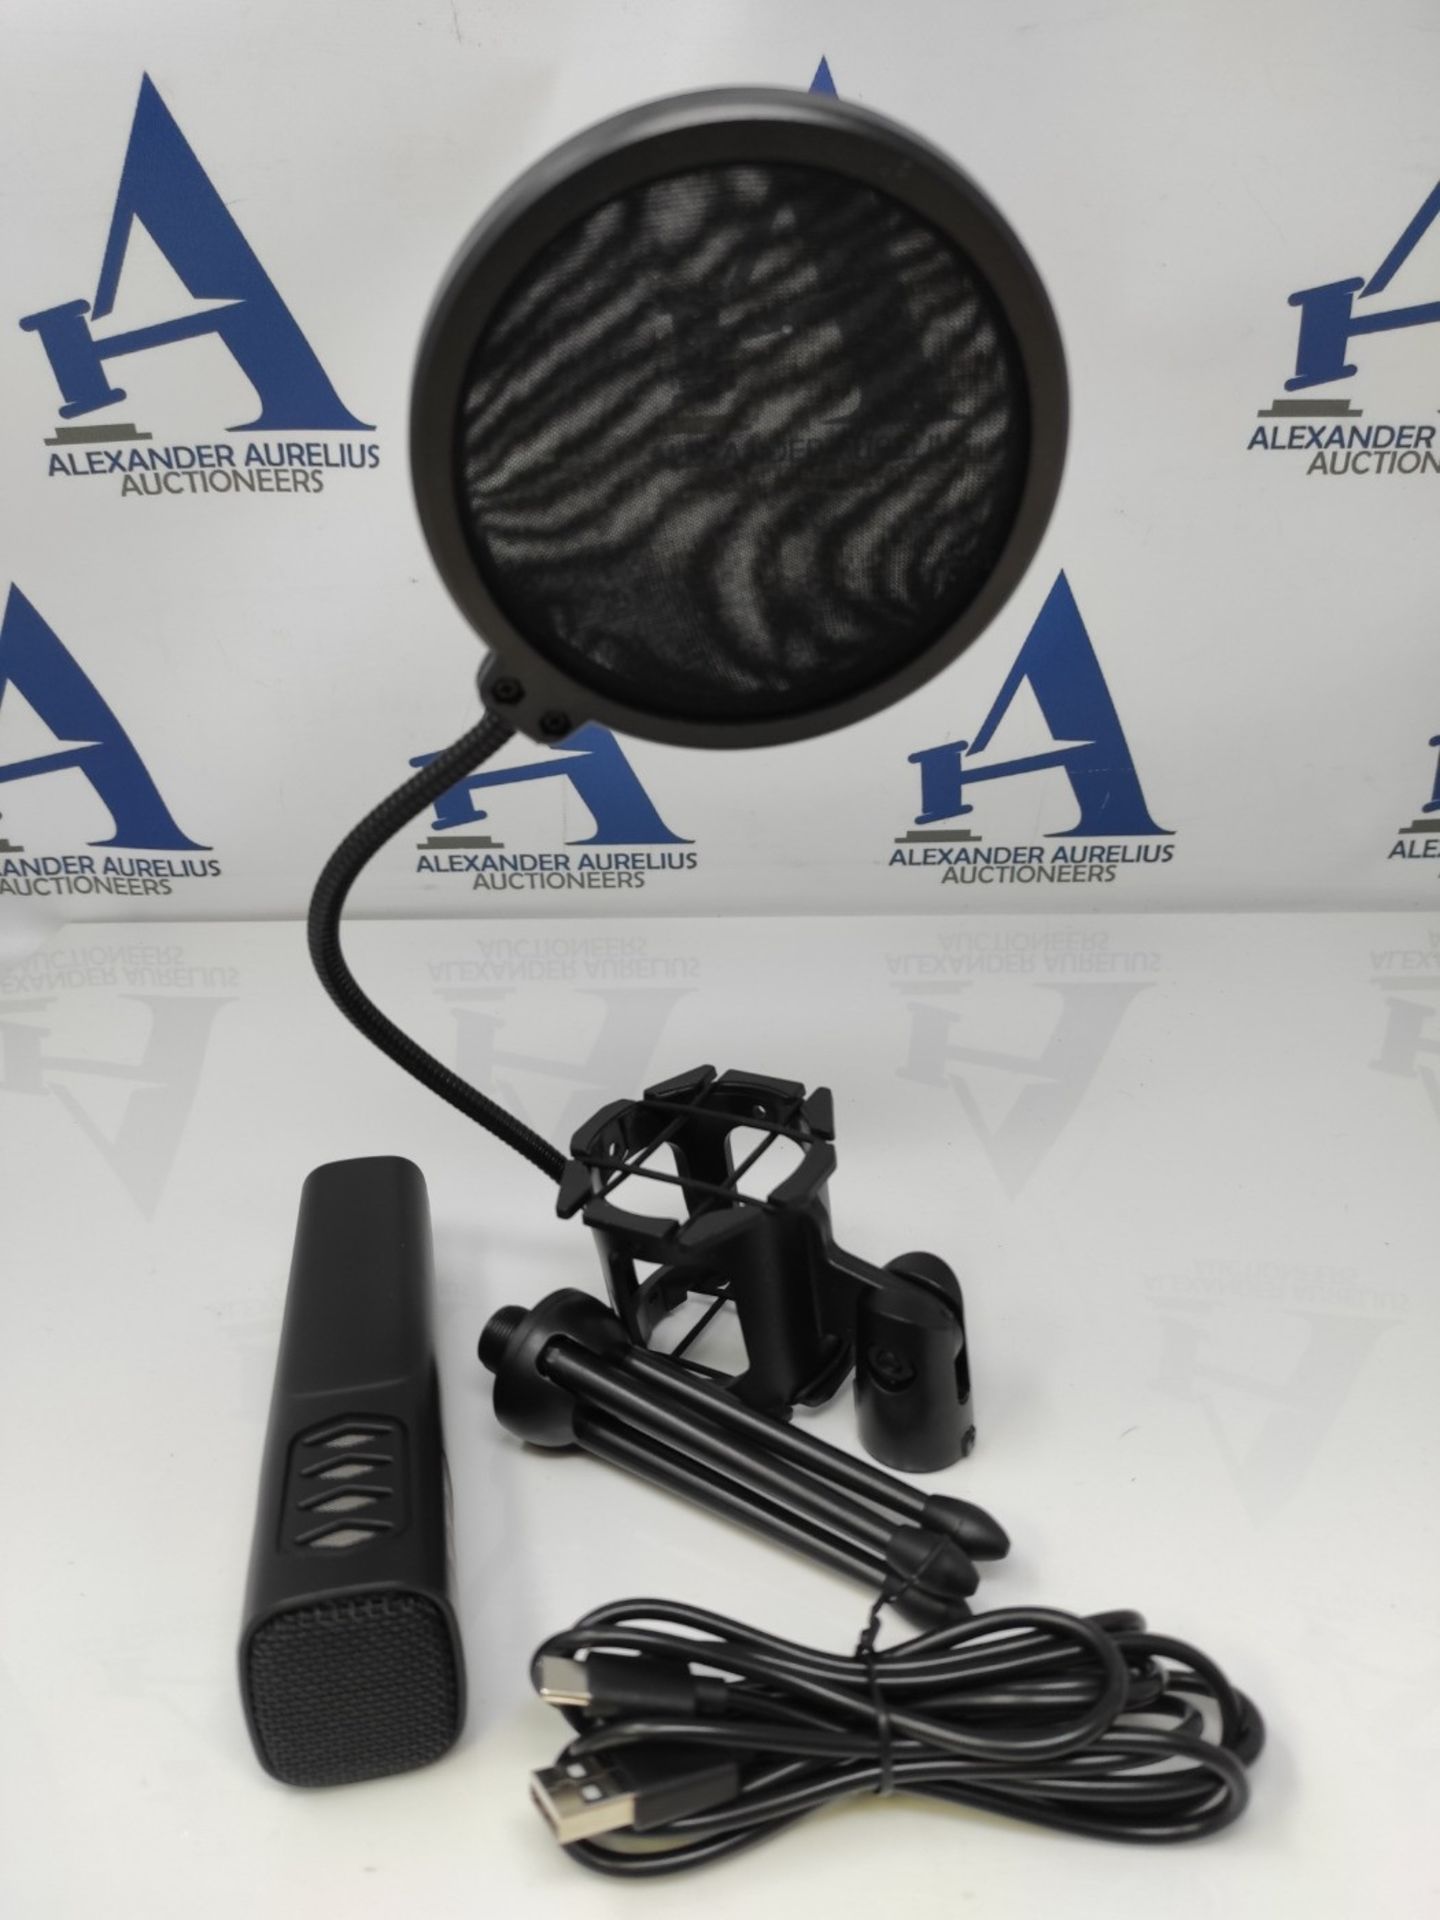 NK USB Condenser Microphone - Microphone with tripod and pop filter for PC/Mac/PS4-5, - Image 3 of 3